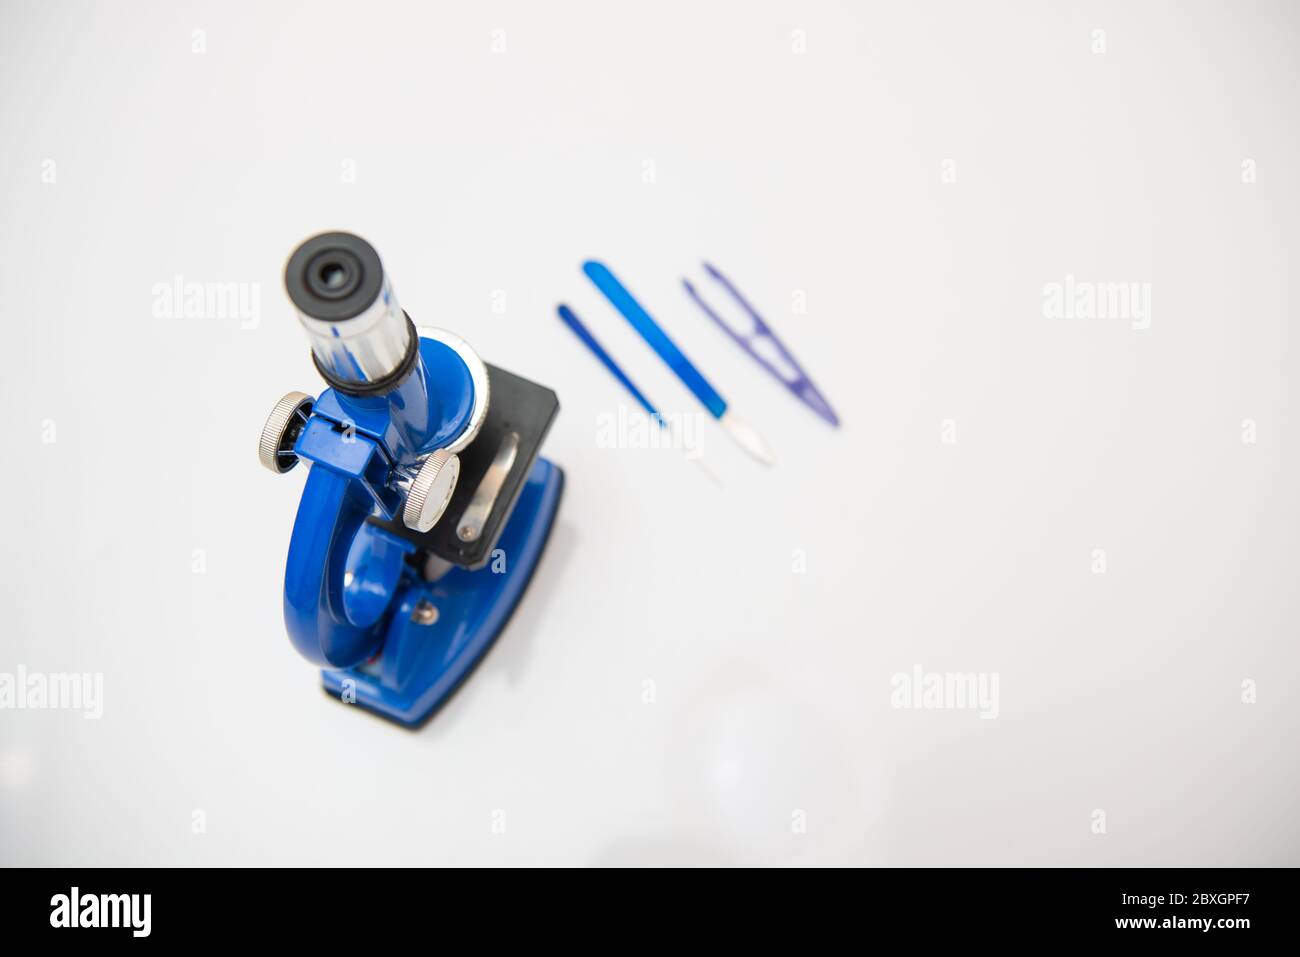 microscope isolated on a white background with research tools Stock Photo